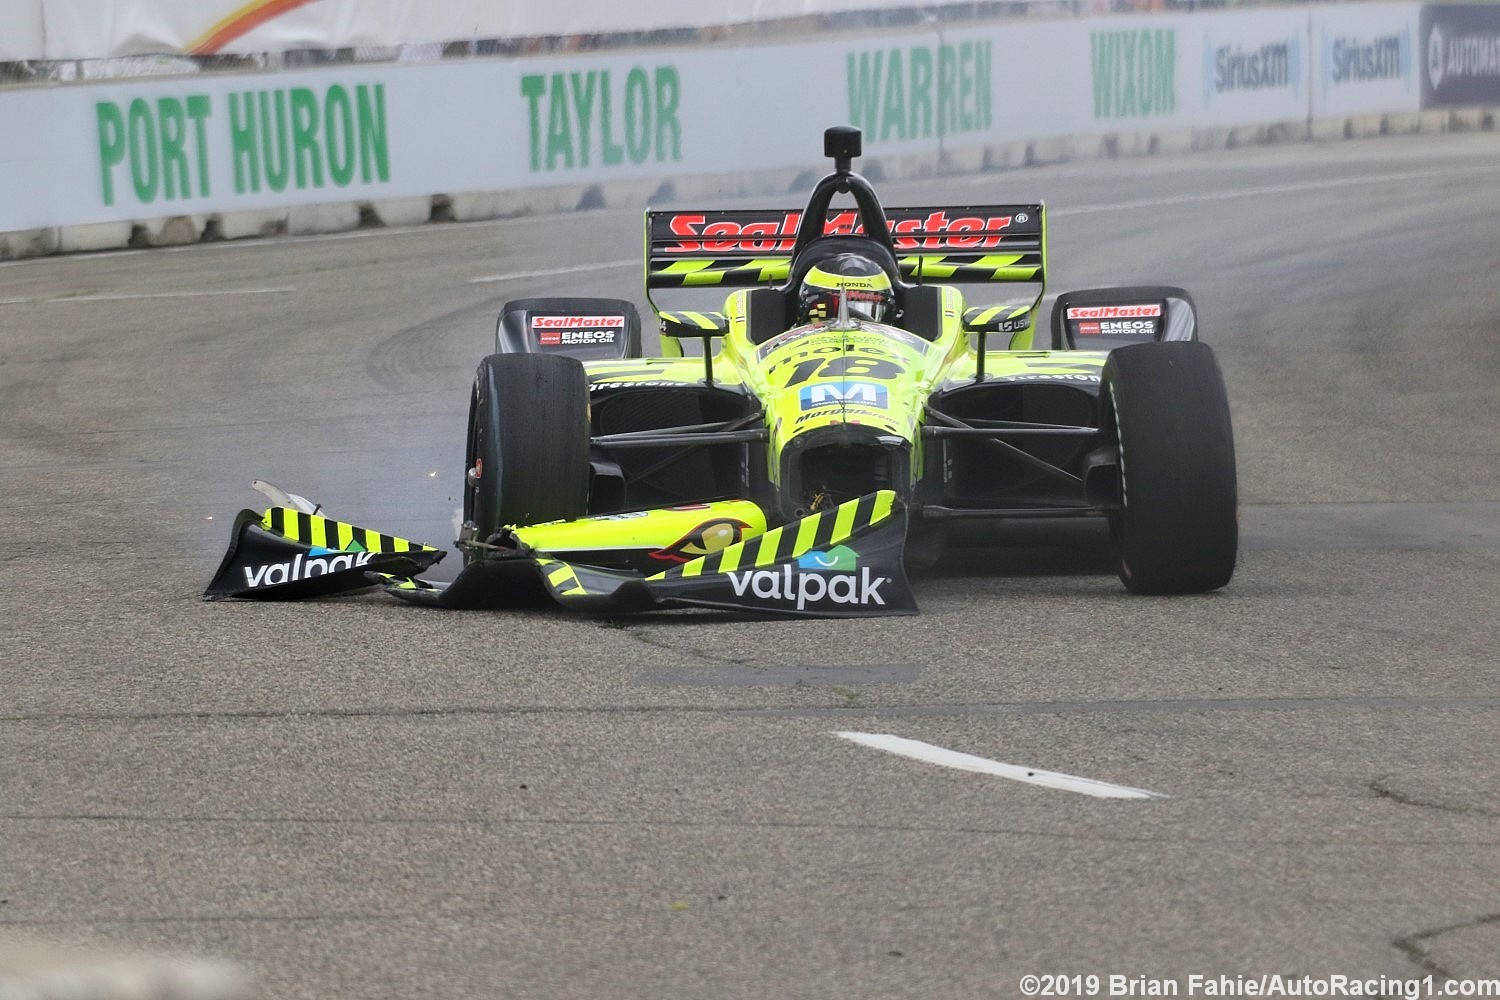 Sebastien Bourdais went airbourne when he rammed the back the Spencer Pigot as Pigot struggled to get onto pit lane